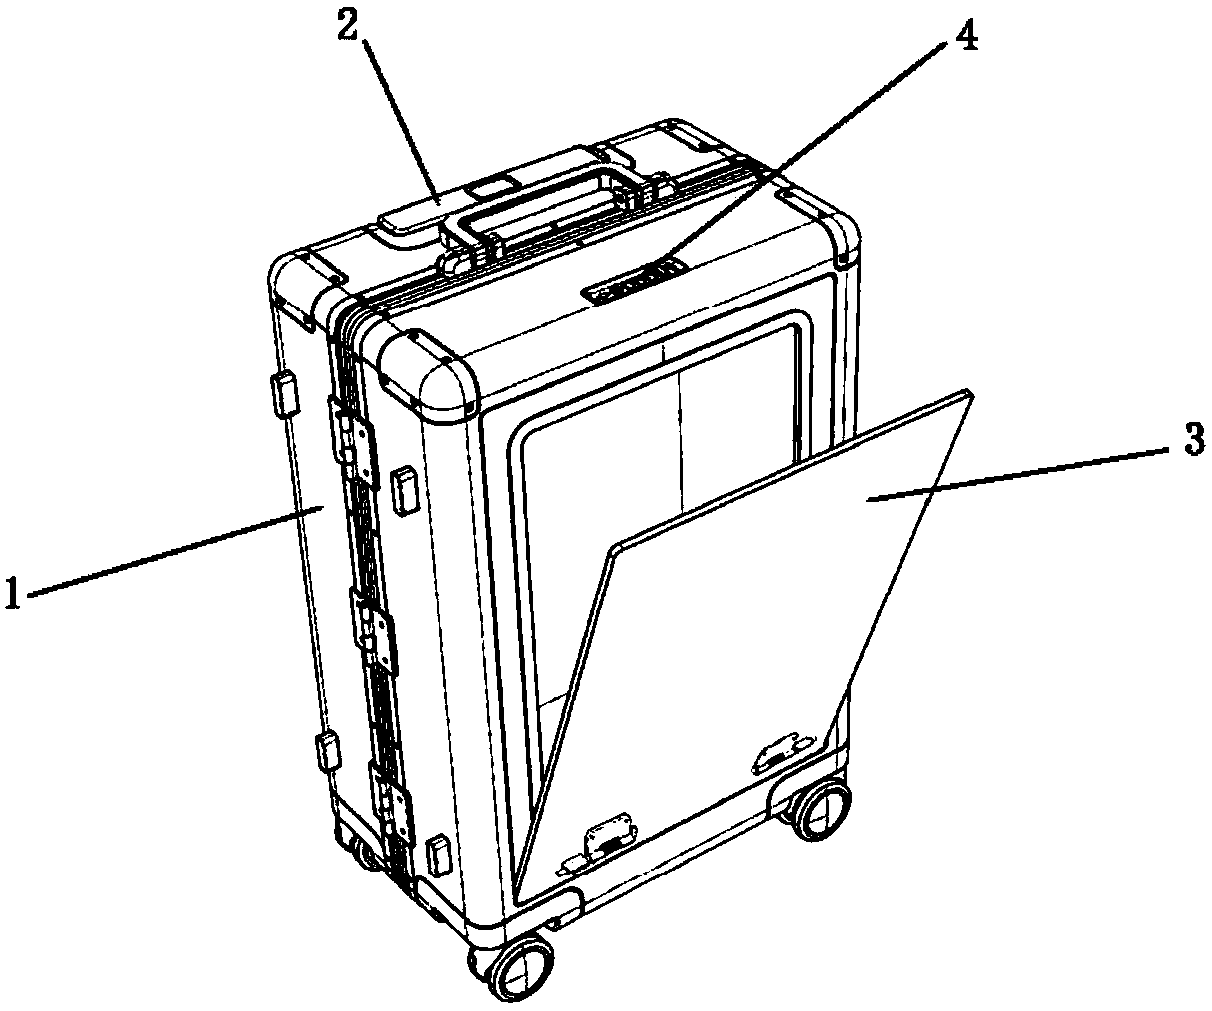 Detachable luggage case provided with front door